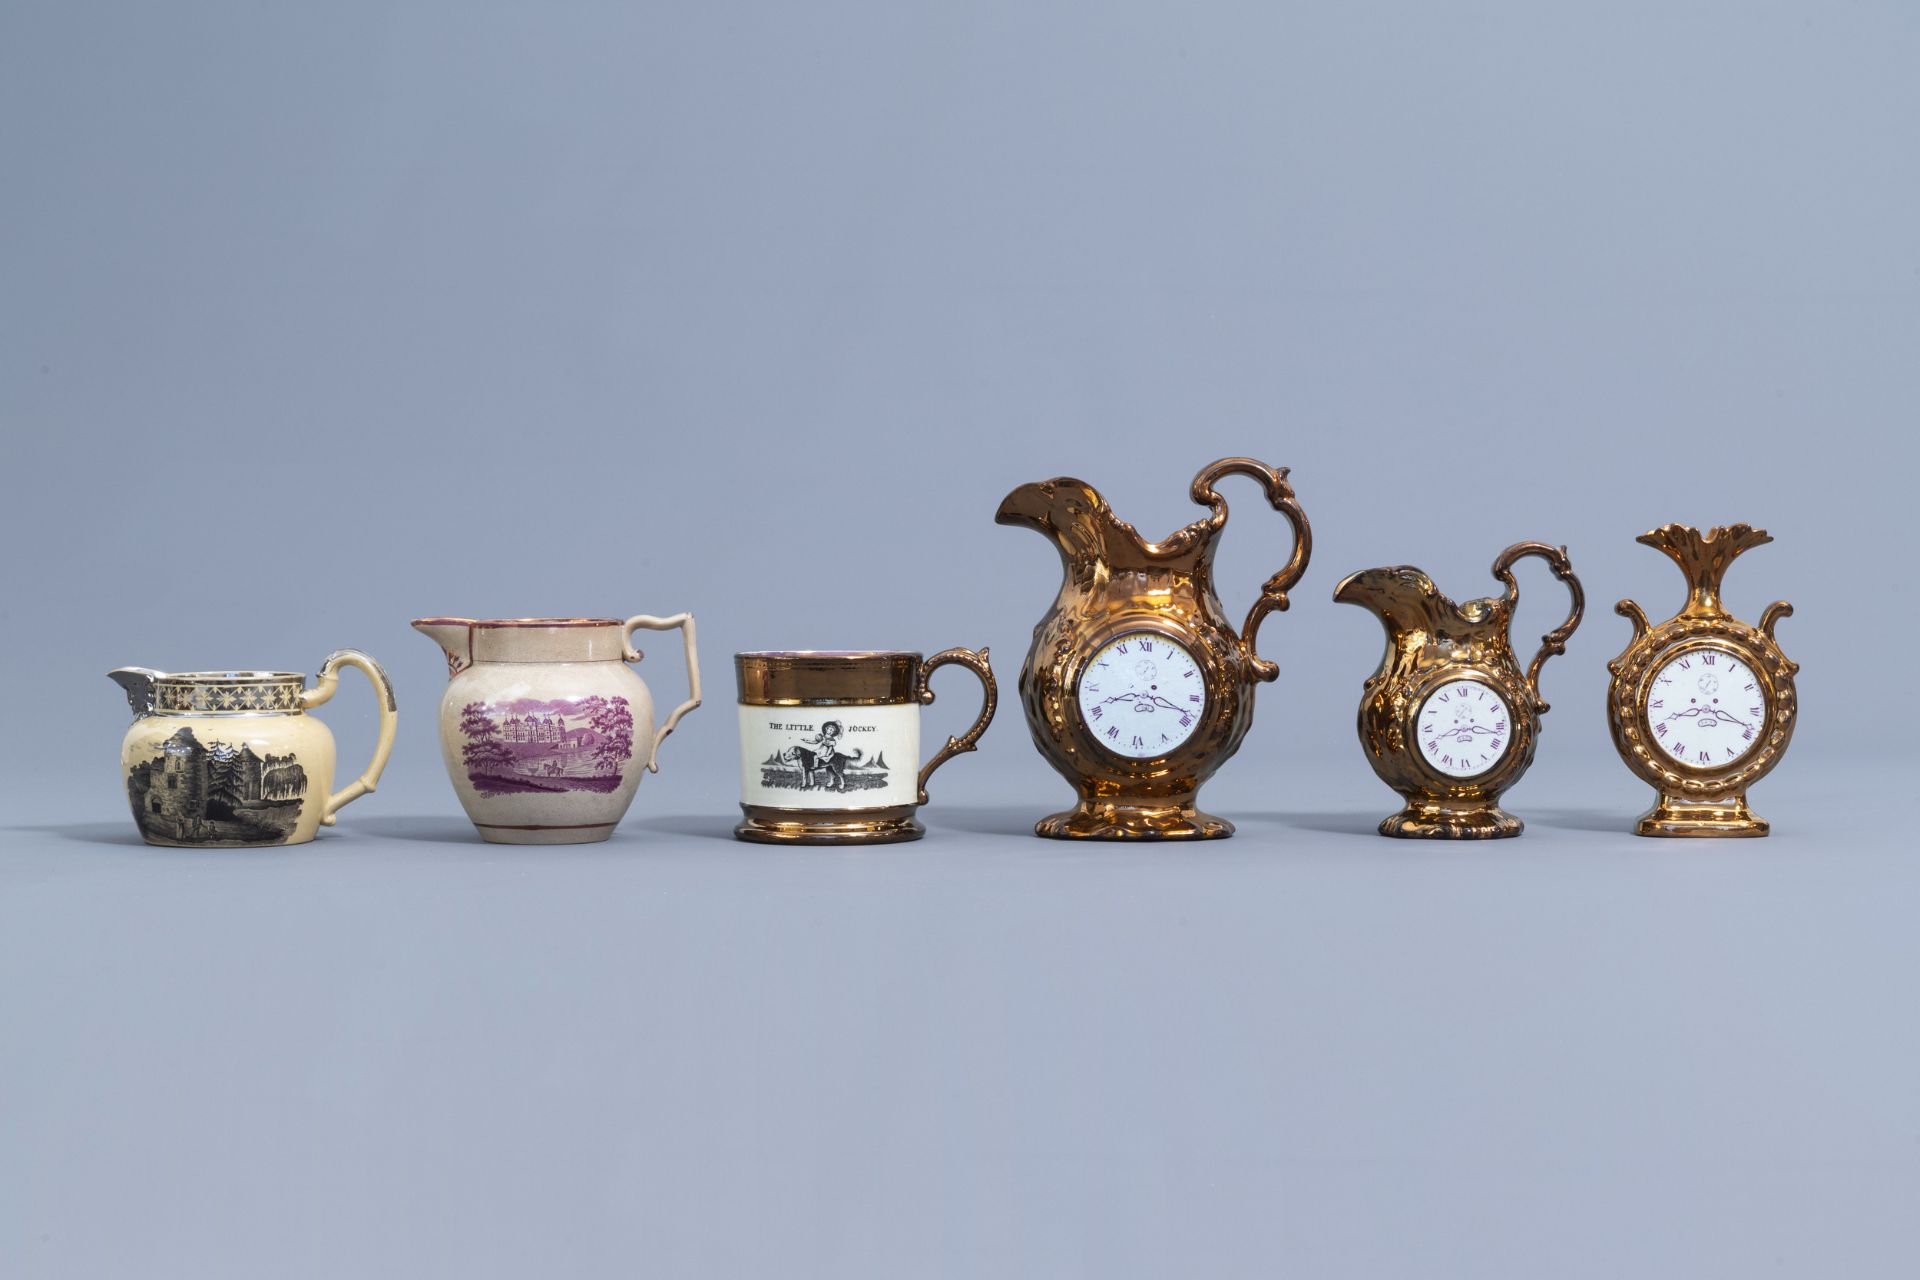 A varied collection of English lustreware items, 19th C. - Image 36 of 42